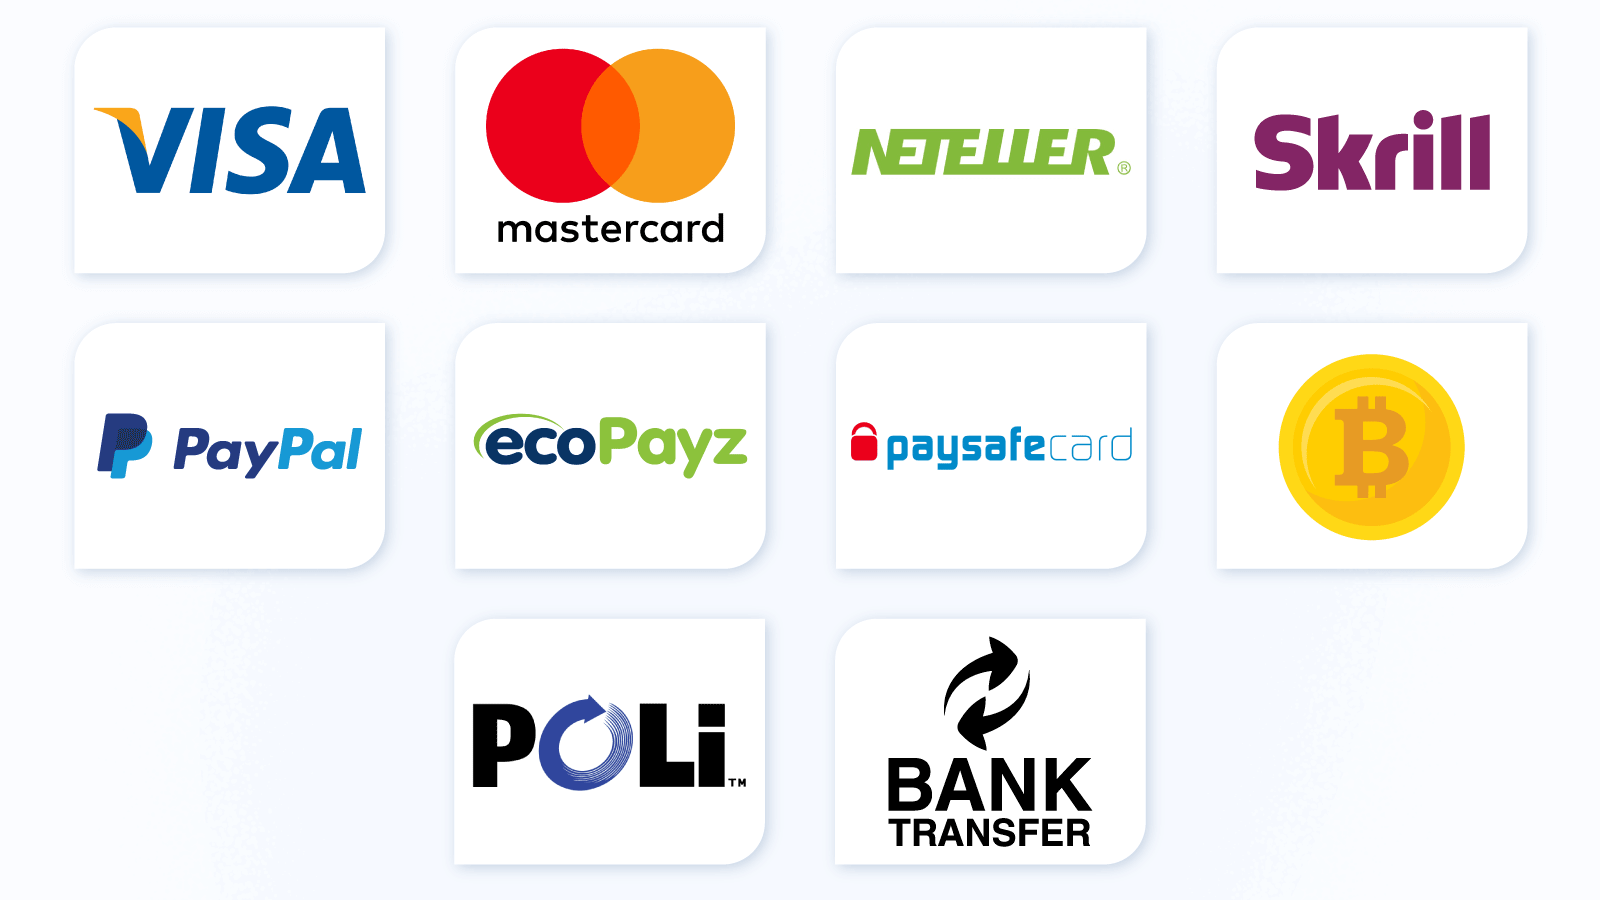 Recommended payment methods for Kiwis